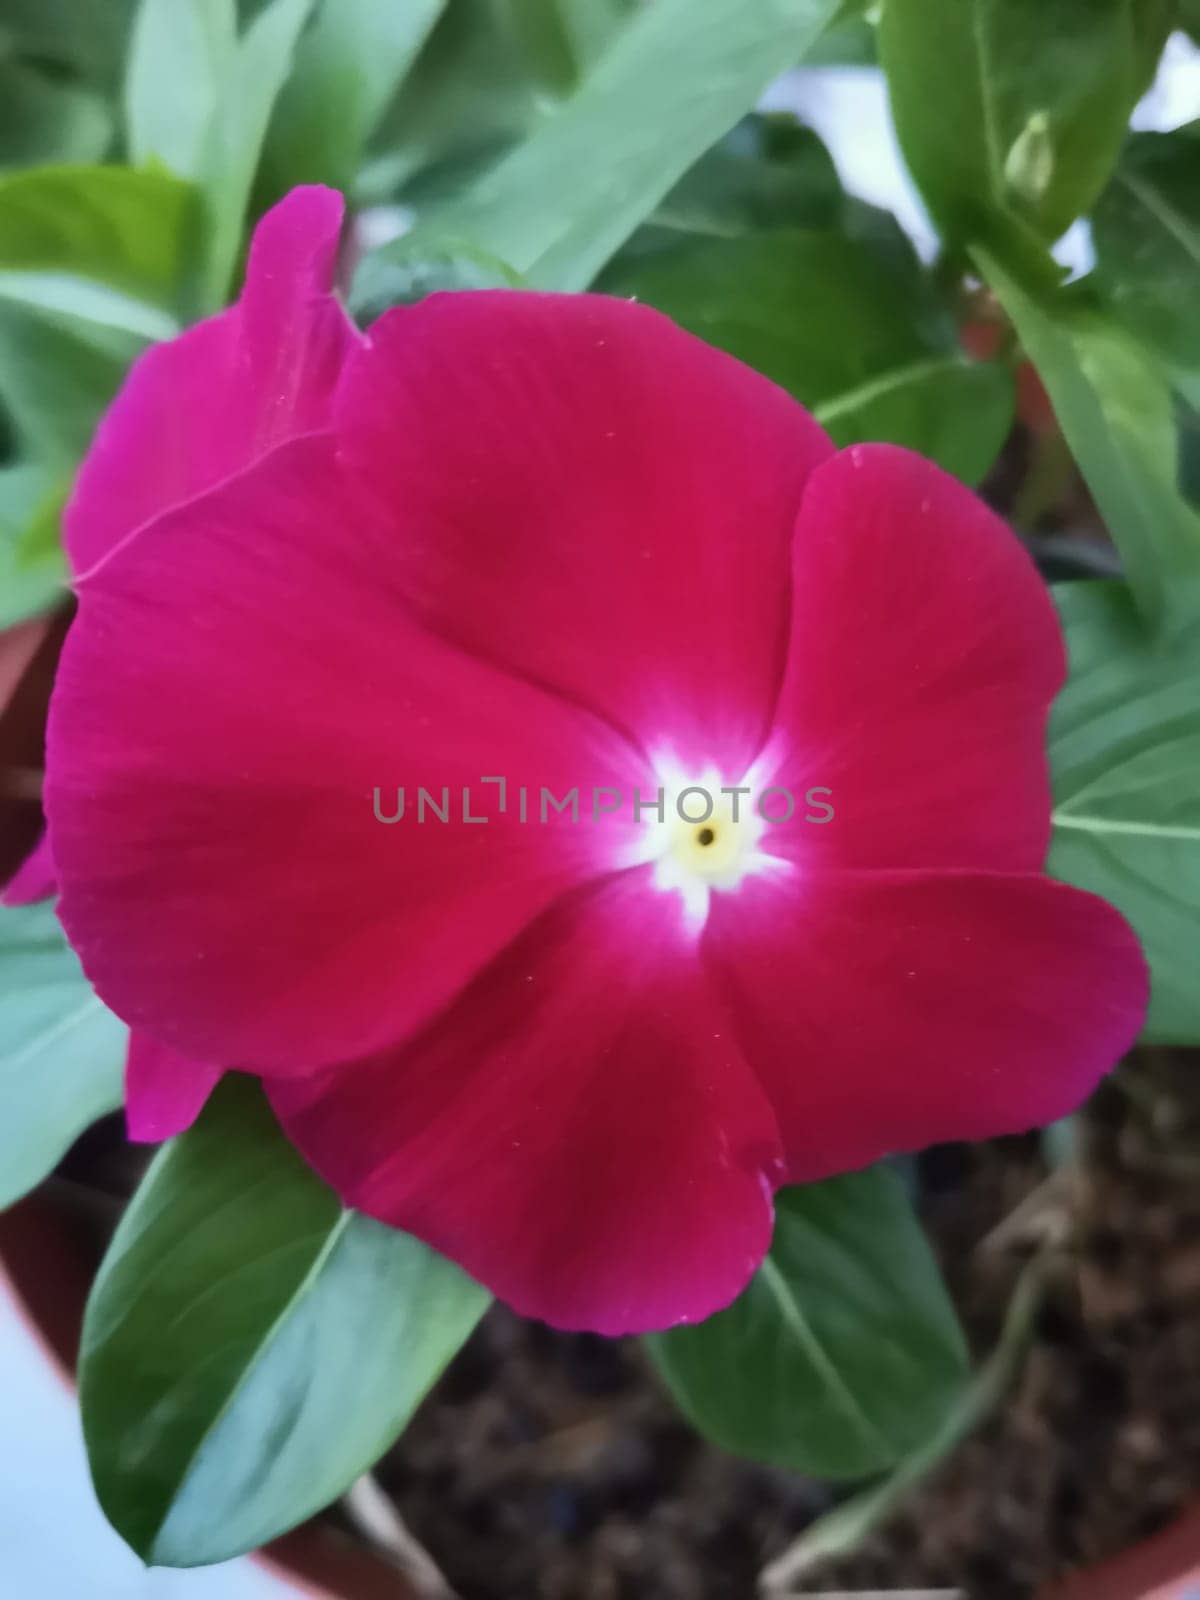 Vinca rosea flowers with green leaves background blossom in the garden.